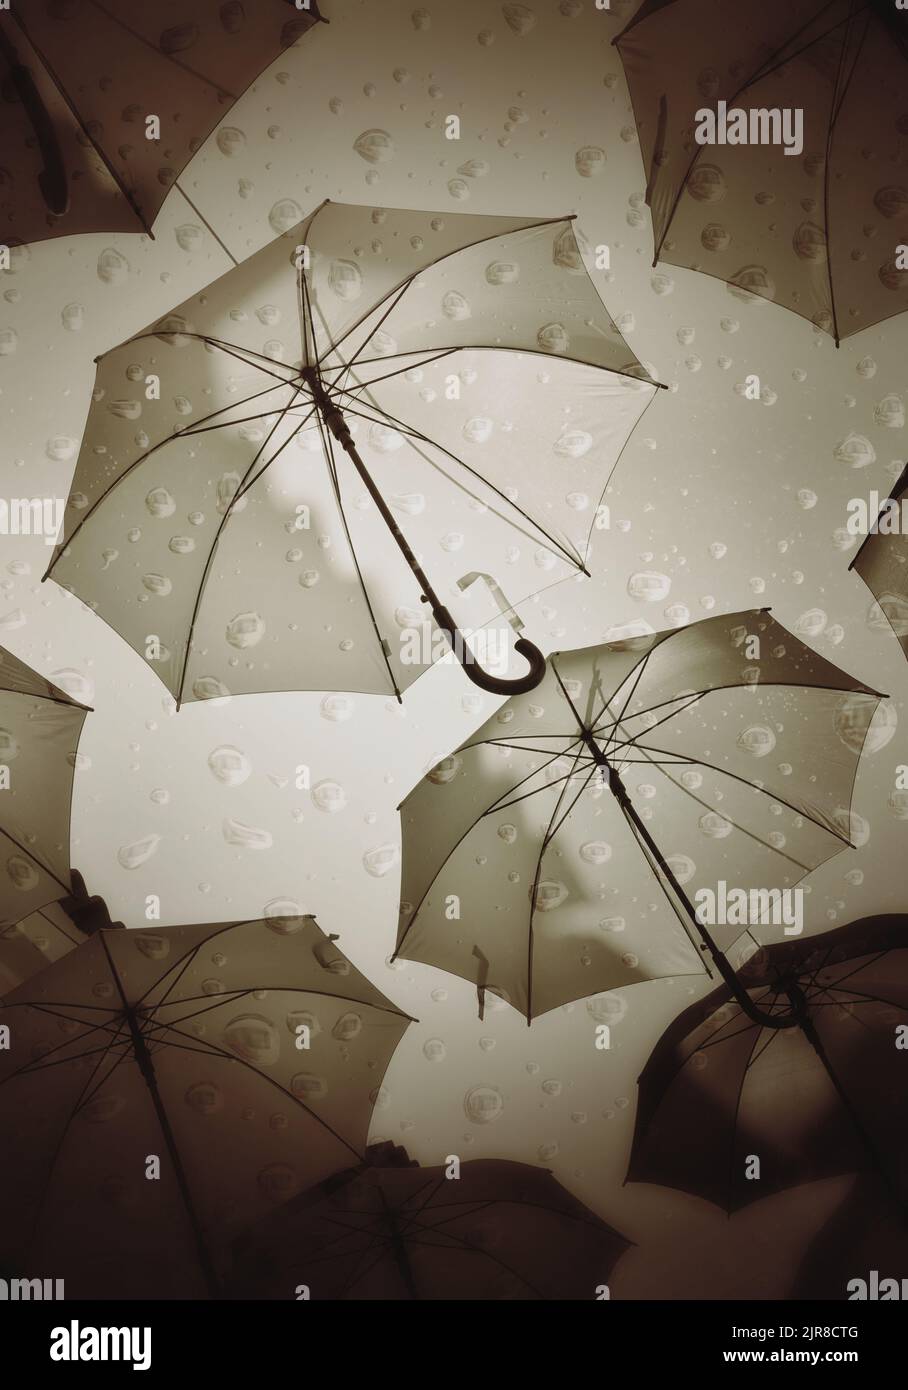 Superimposed images of raindrops and umbrellas as a representation of bad weather Stock Photo